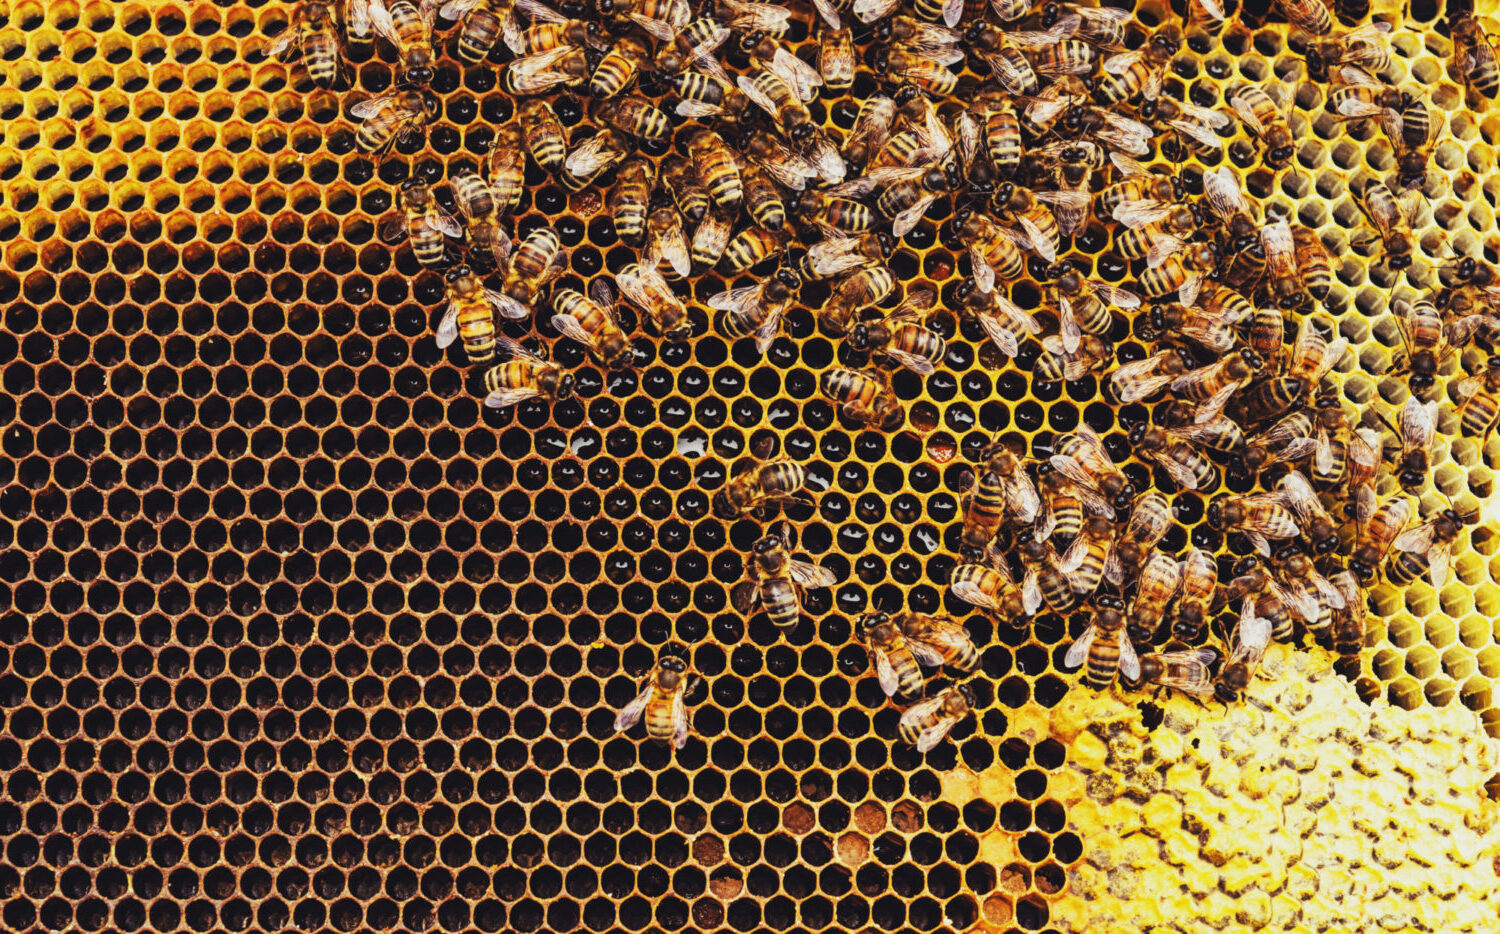 Close-up of a beehive full of honeybees developing their work